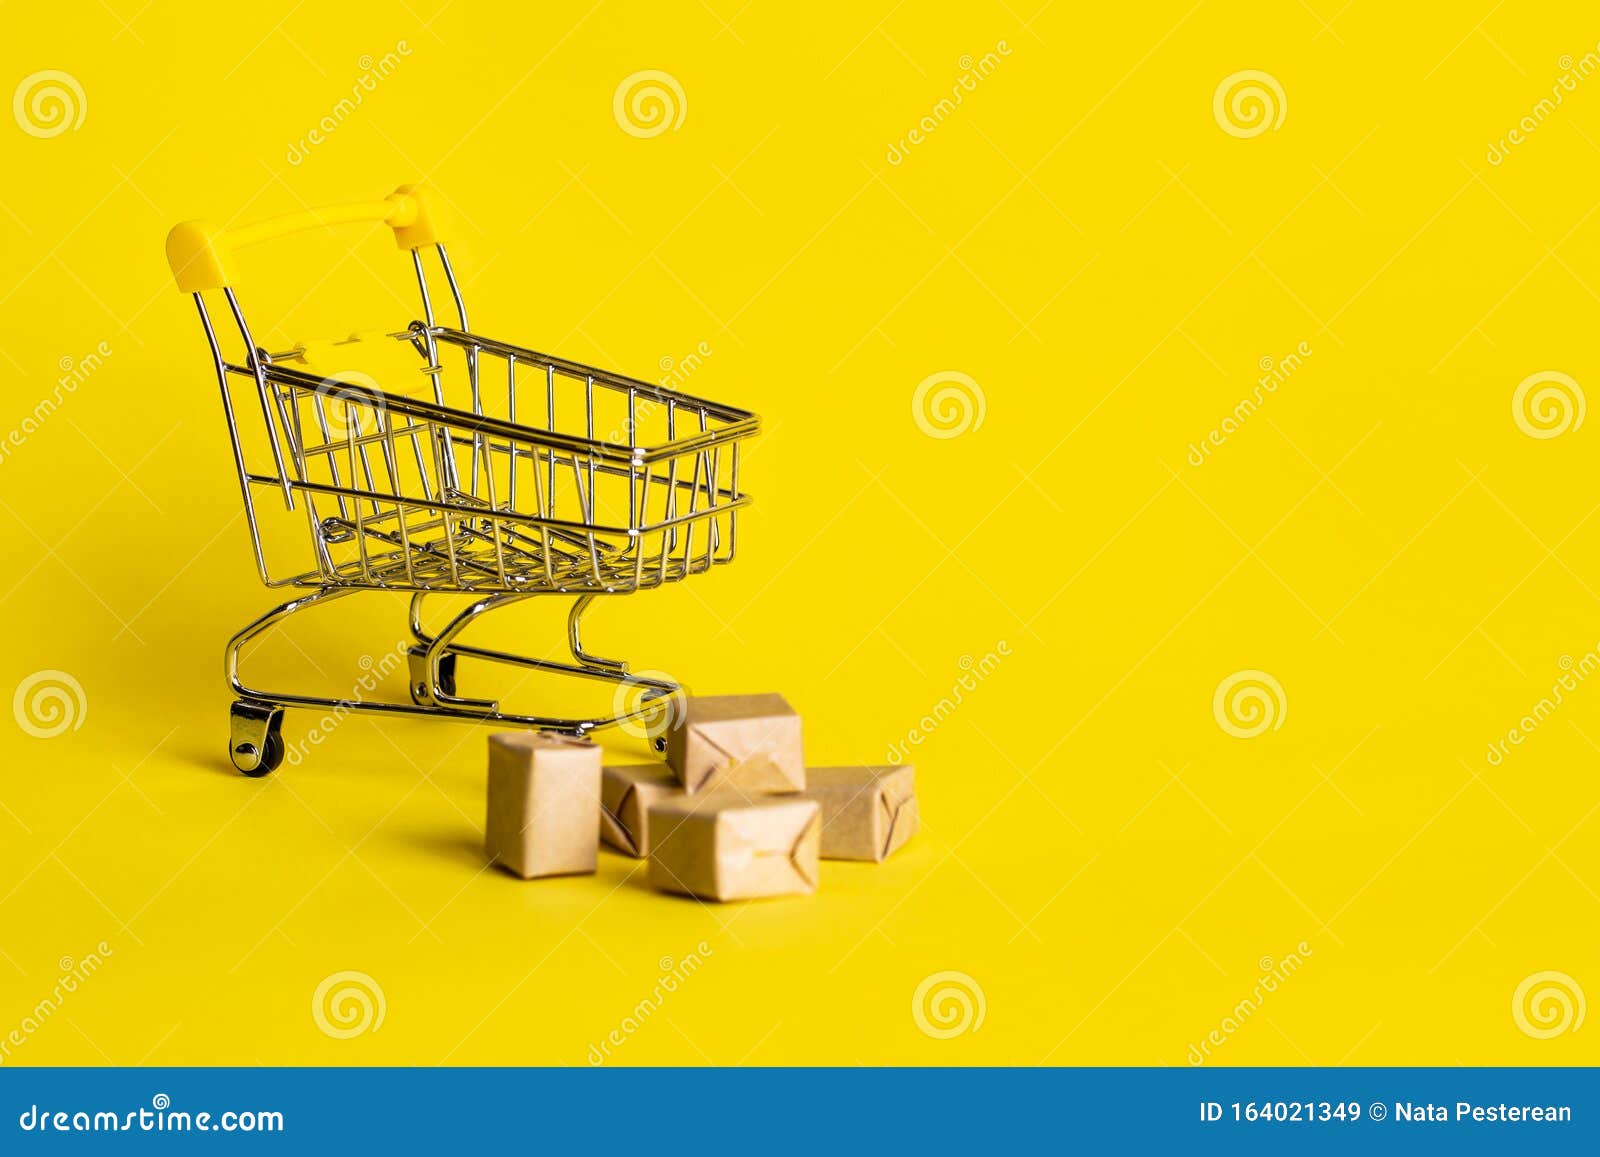 Download Small Decorative Trolley With Boxes On Yellow Background High Resolution Shop Sales Black Friday Concept Stock Image Image Of Packaging Object 164021349 Yellowimages Mockups